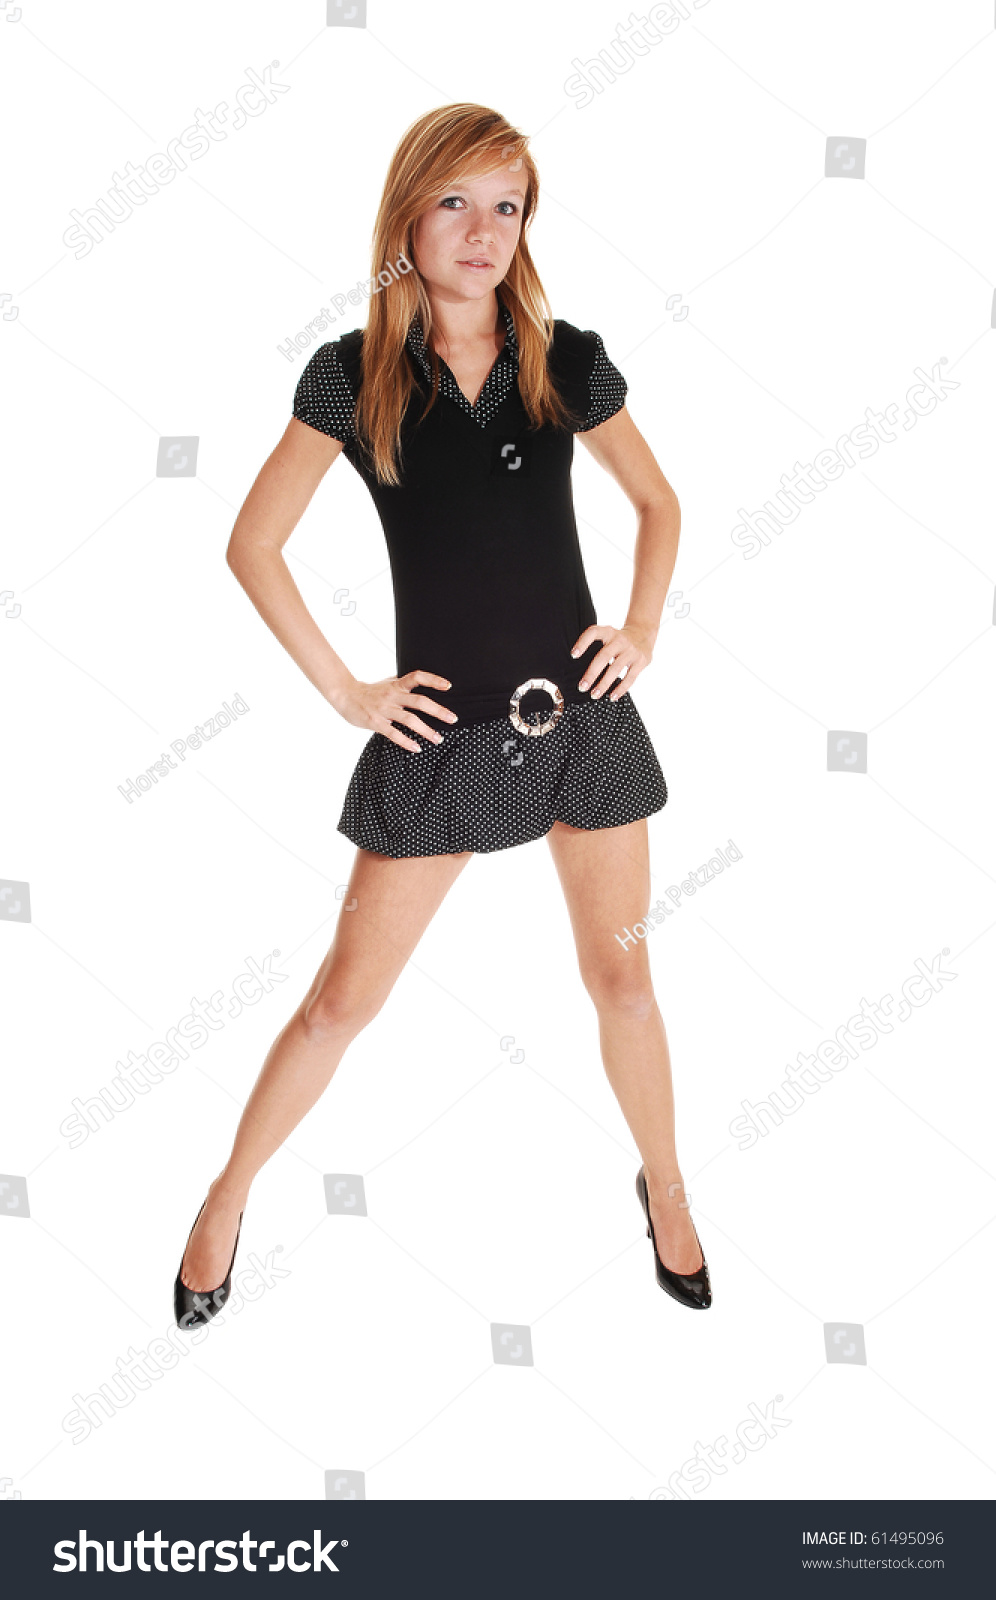 An Pretty Young Woman In An Black Short Dress And High Heels Standing ...